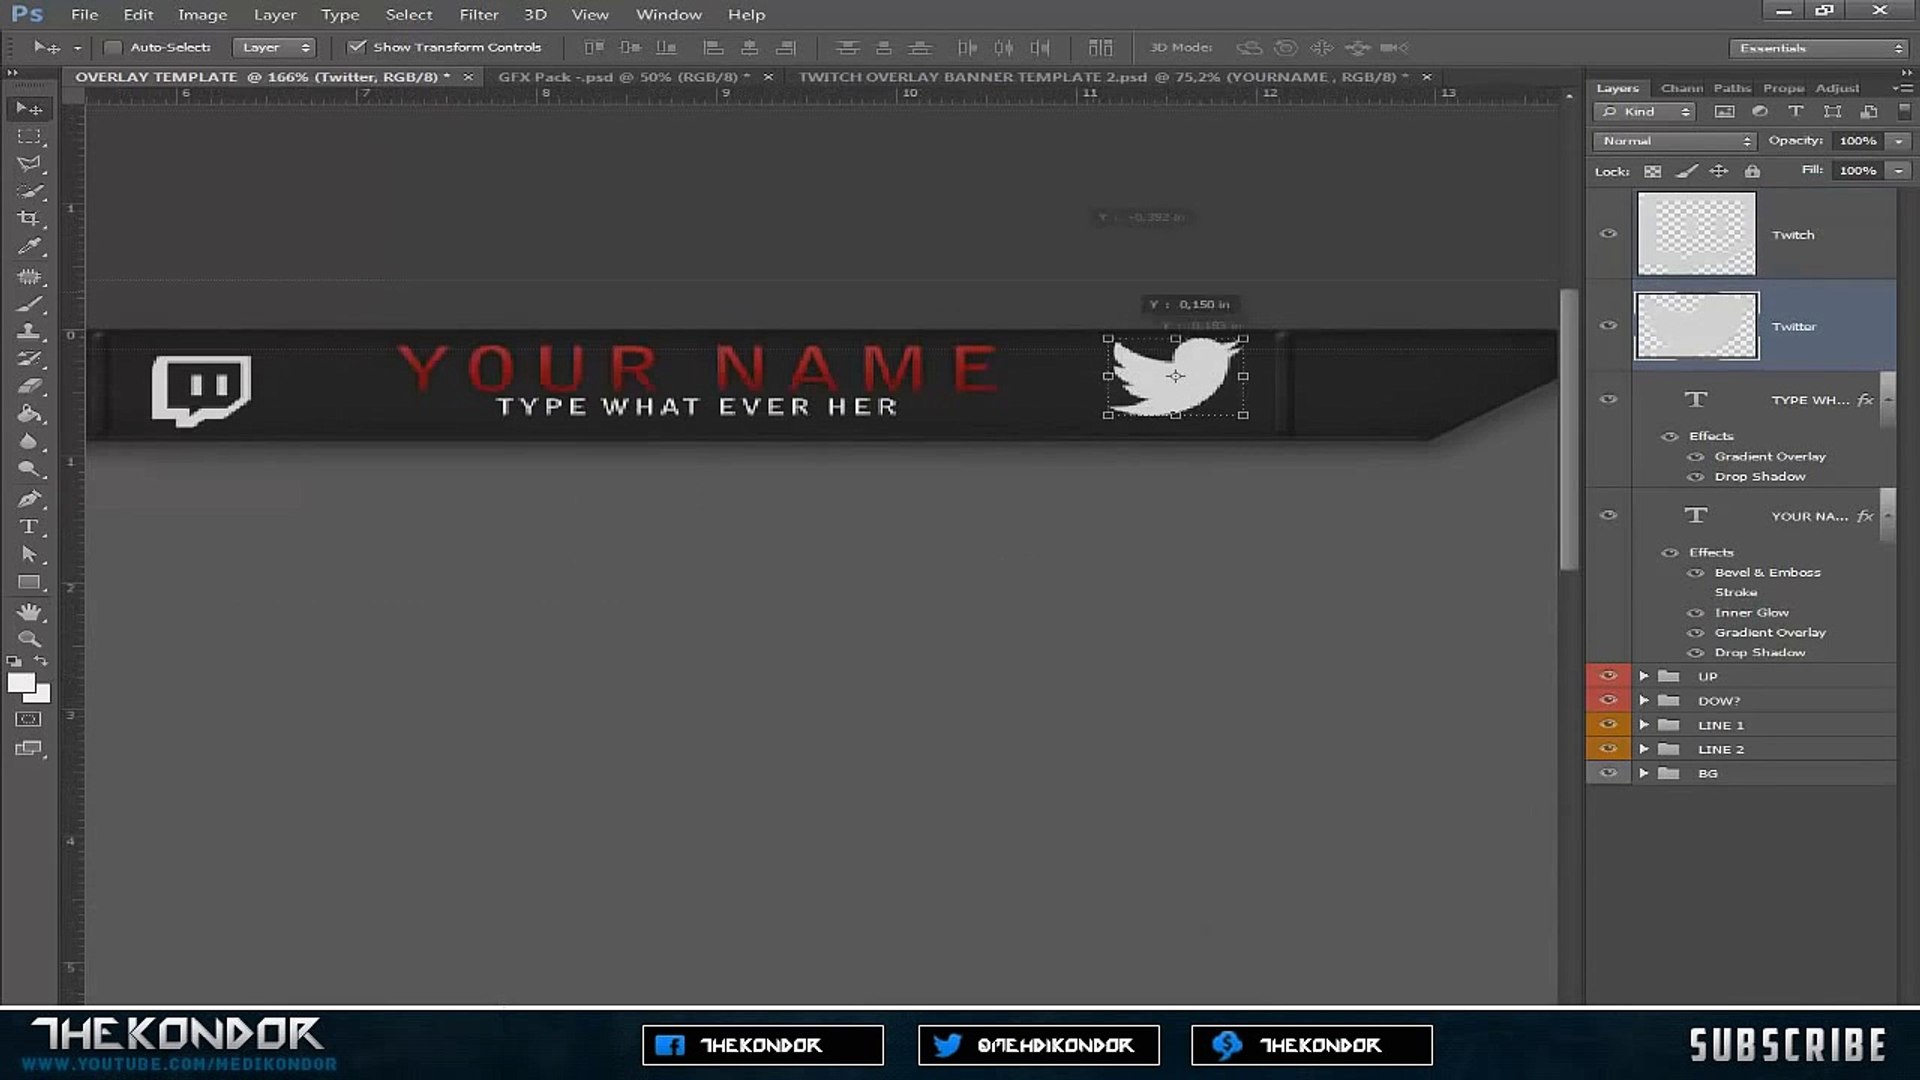 Download Twitch Overlay Banner Template Free Psd 2014 Hd 2 Video Dailymotion PSD Mockup Templates